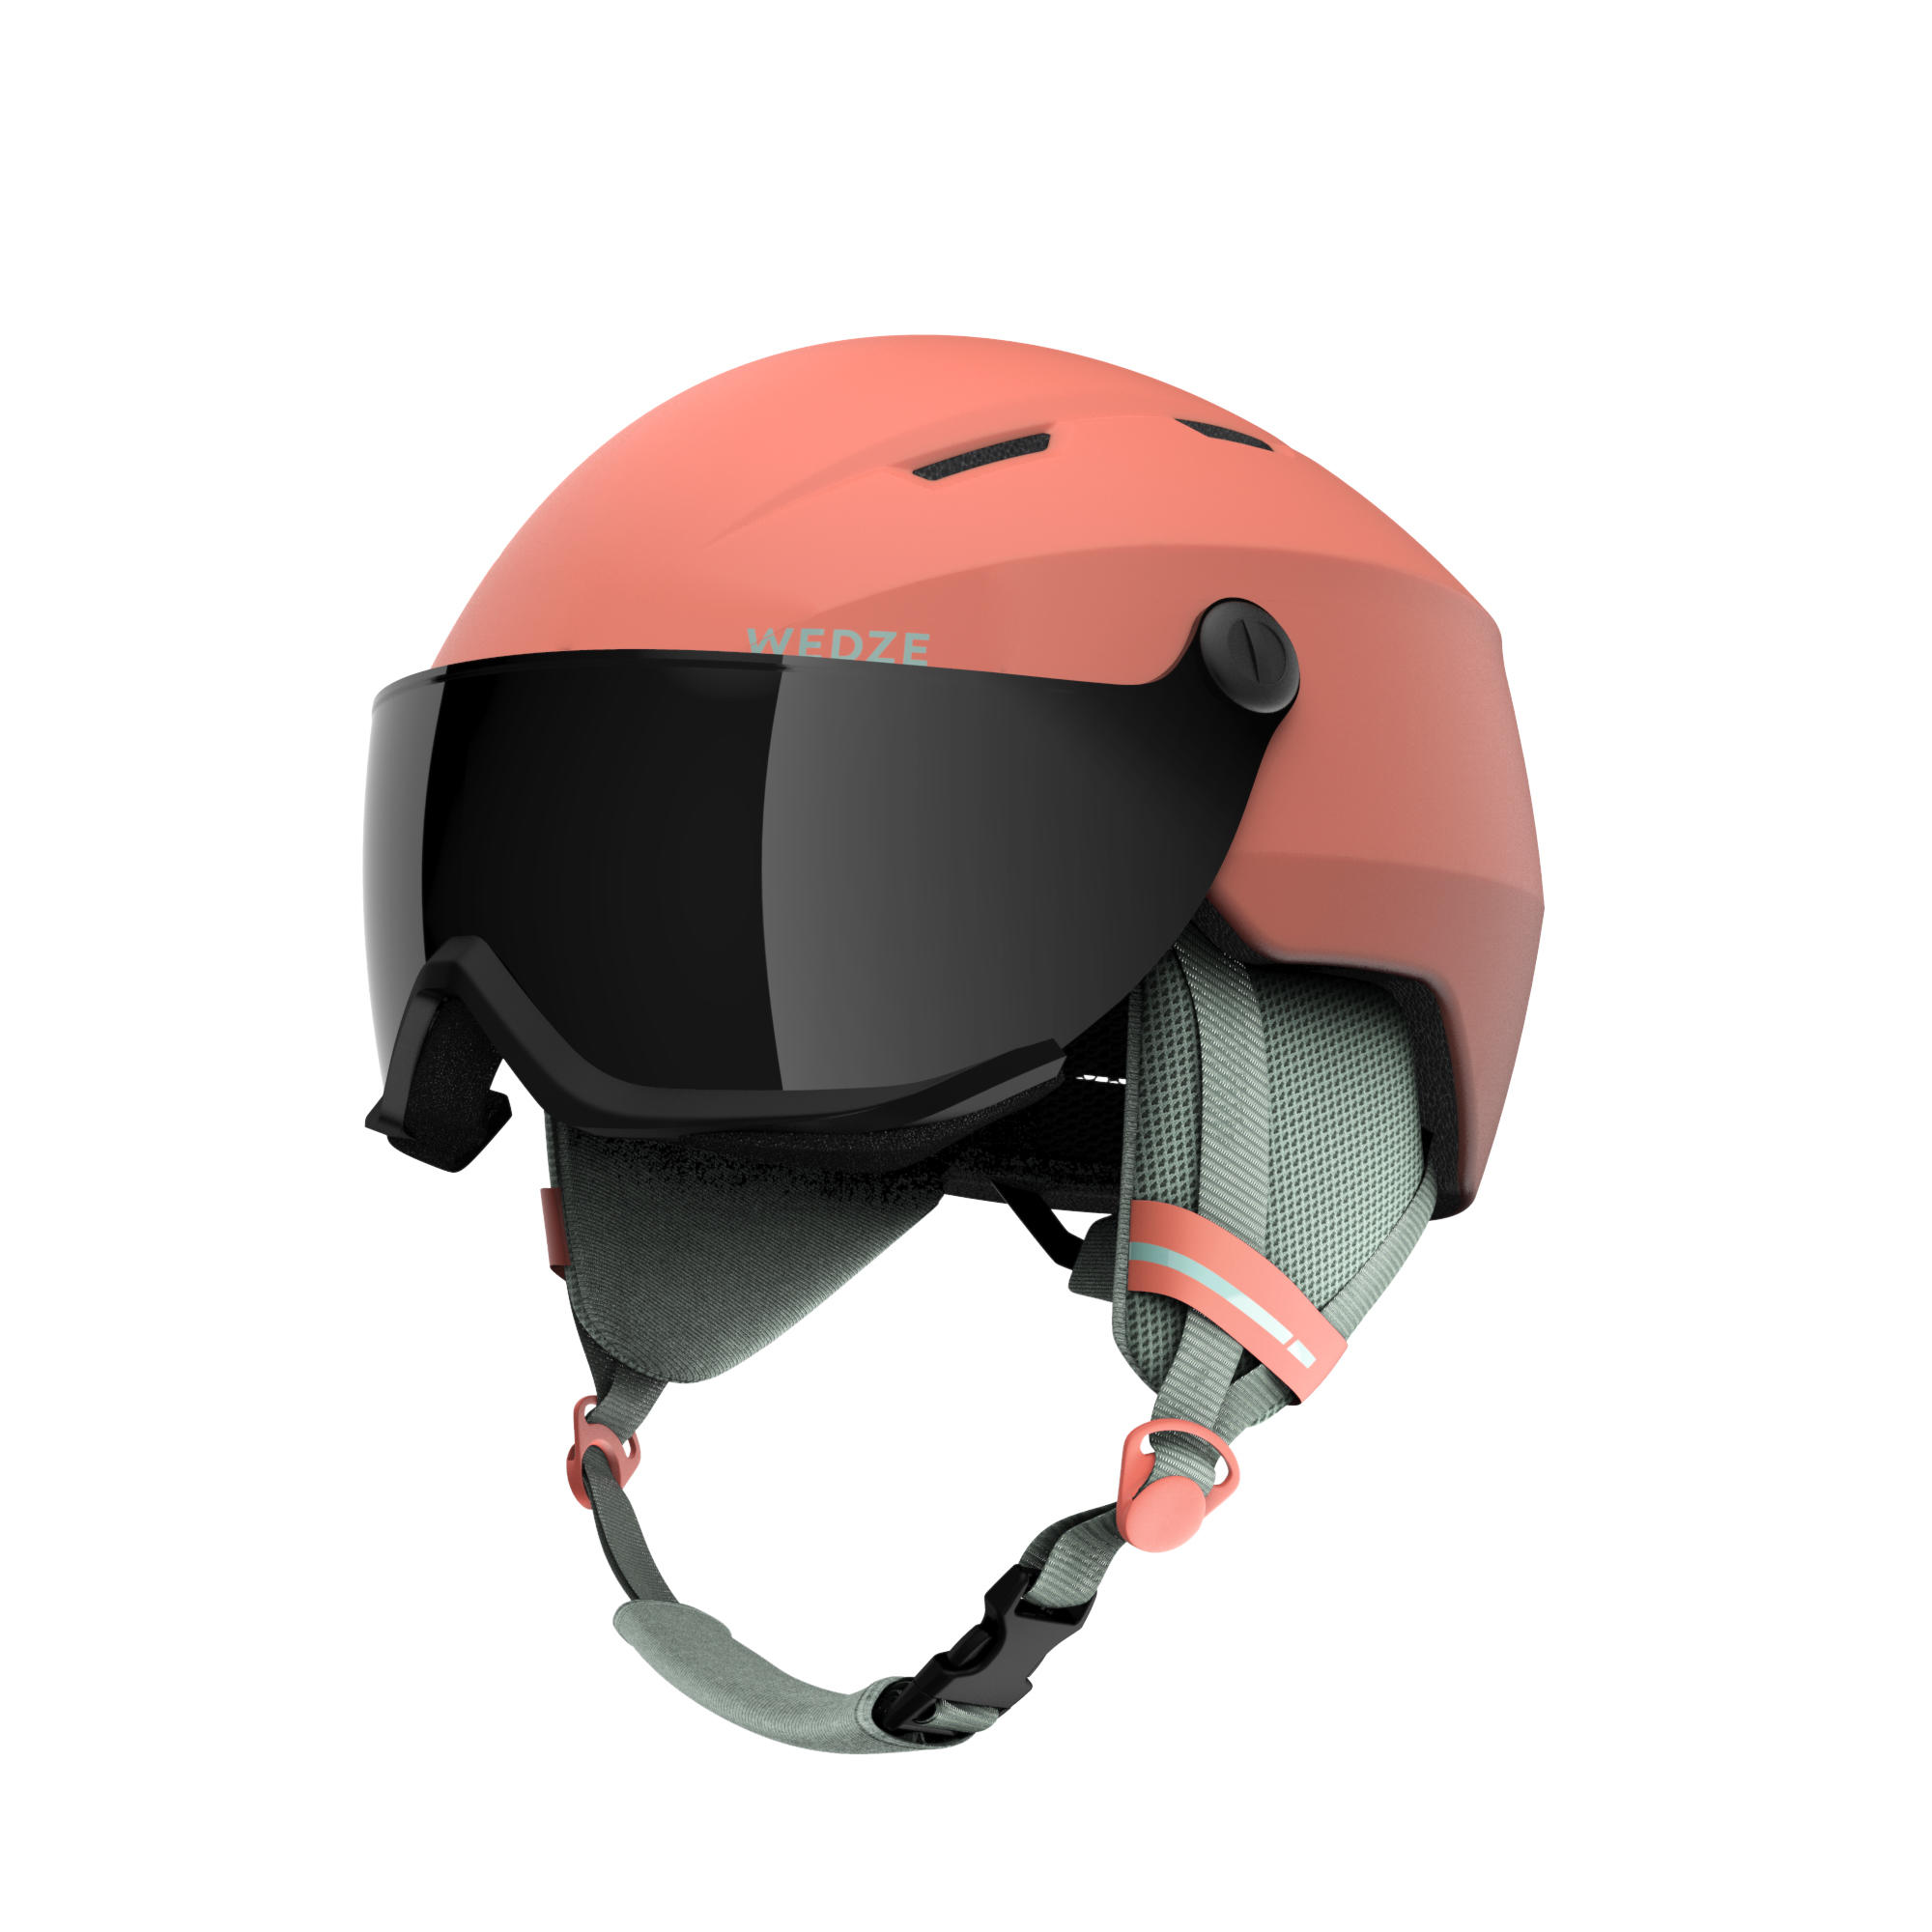 ADULTS' DOWNHILL SKI HELMET WITH VISOR H350 - CORAL 8/9